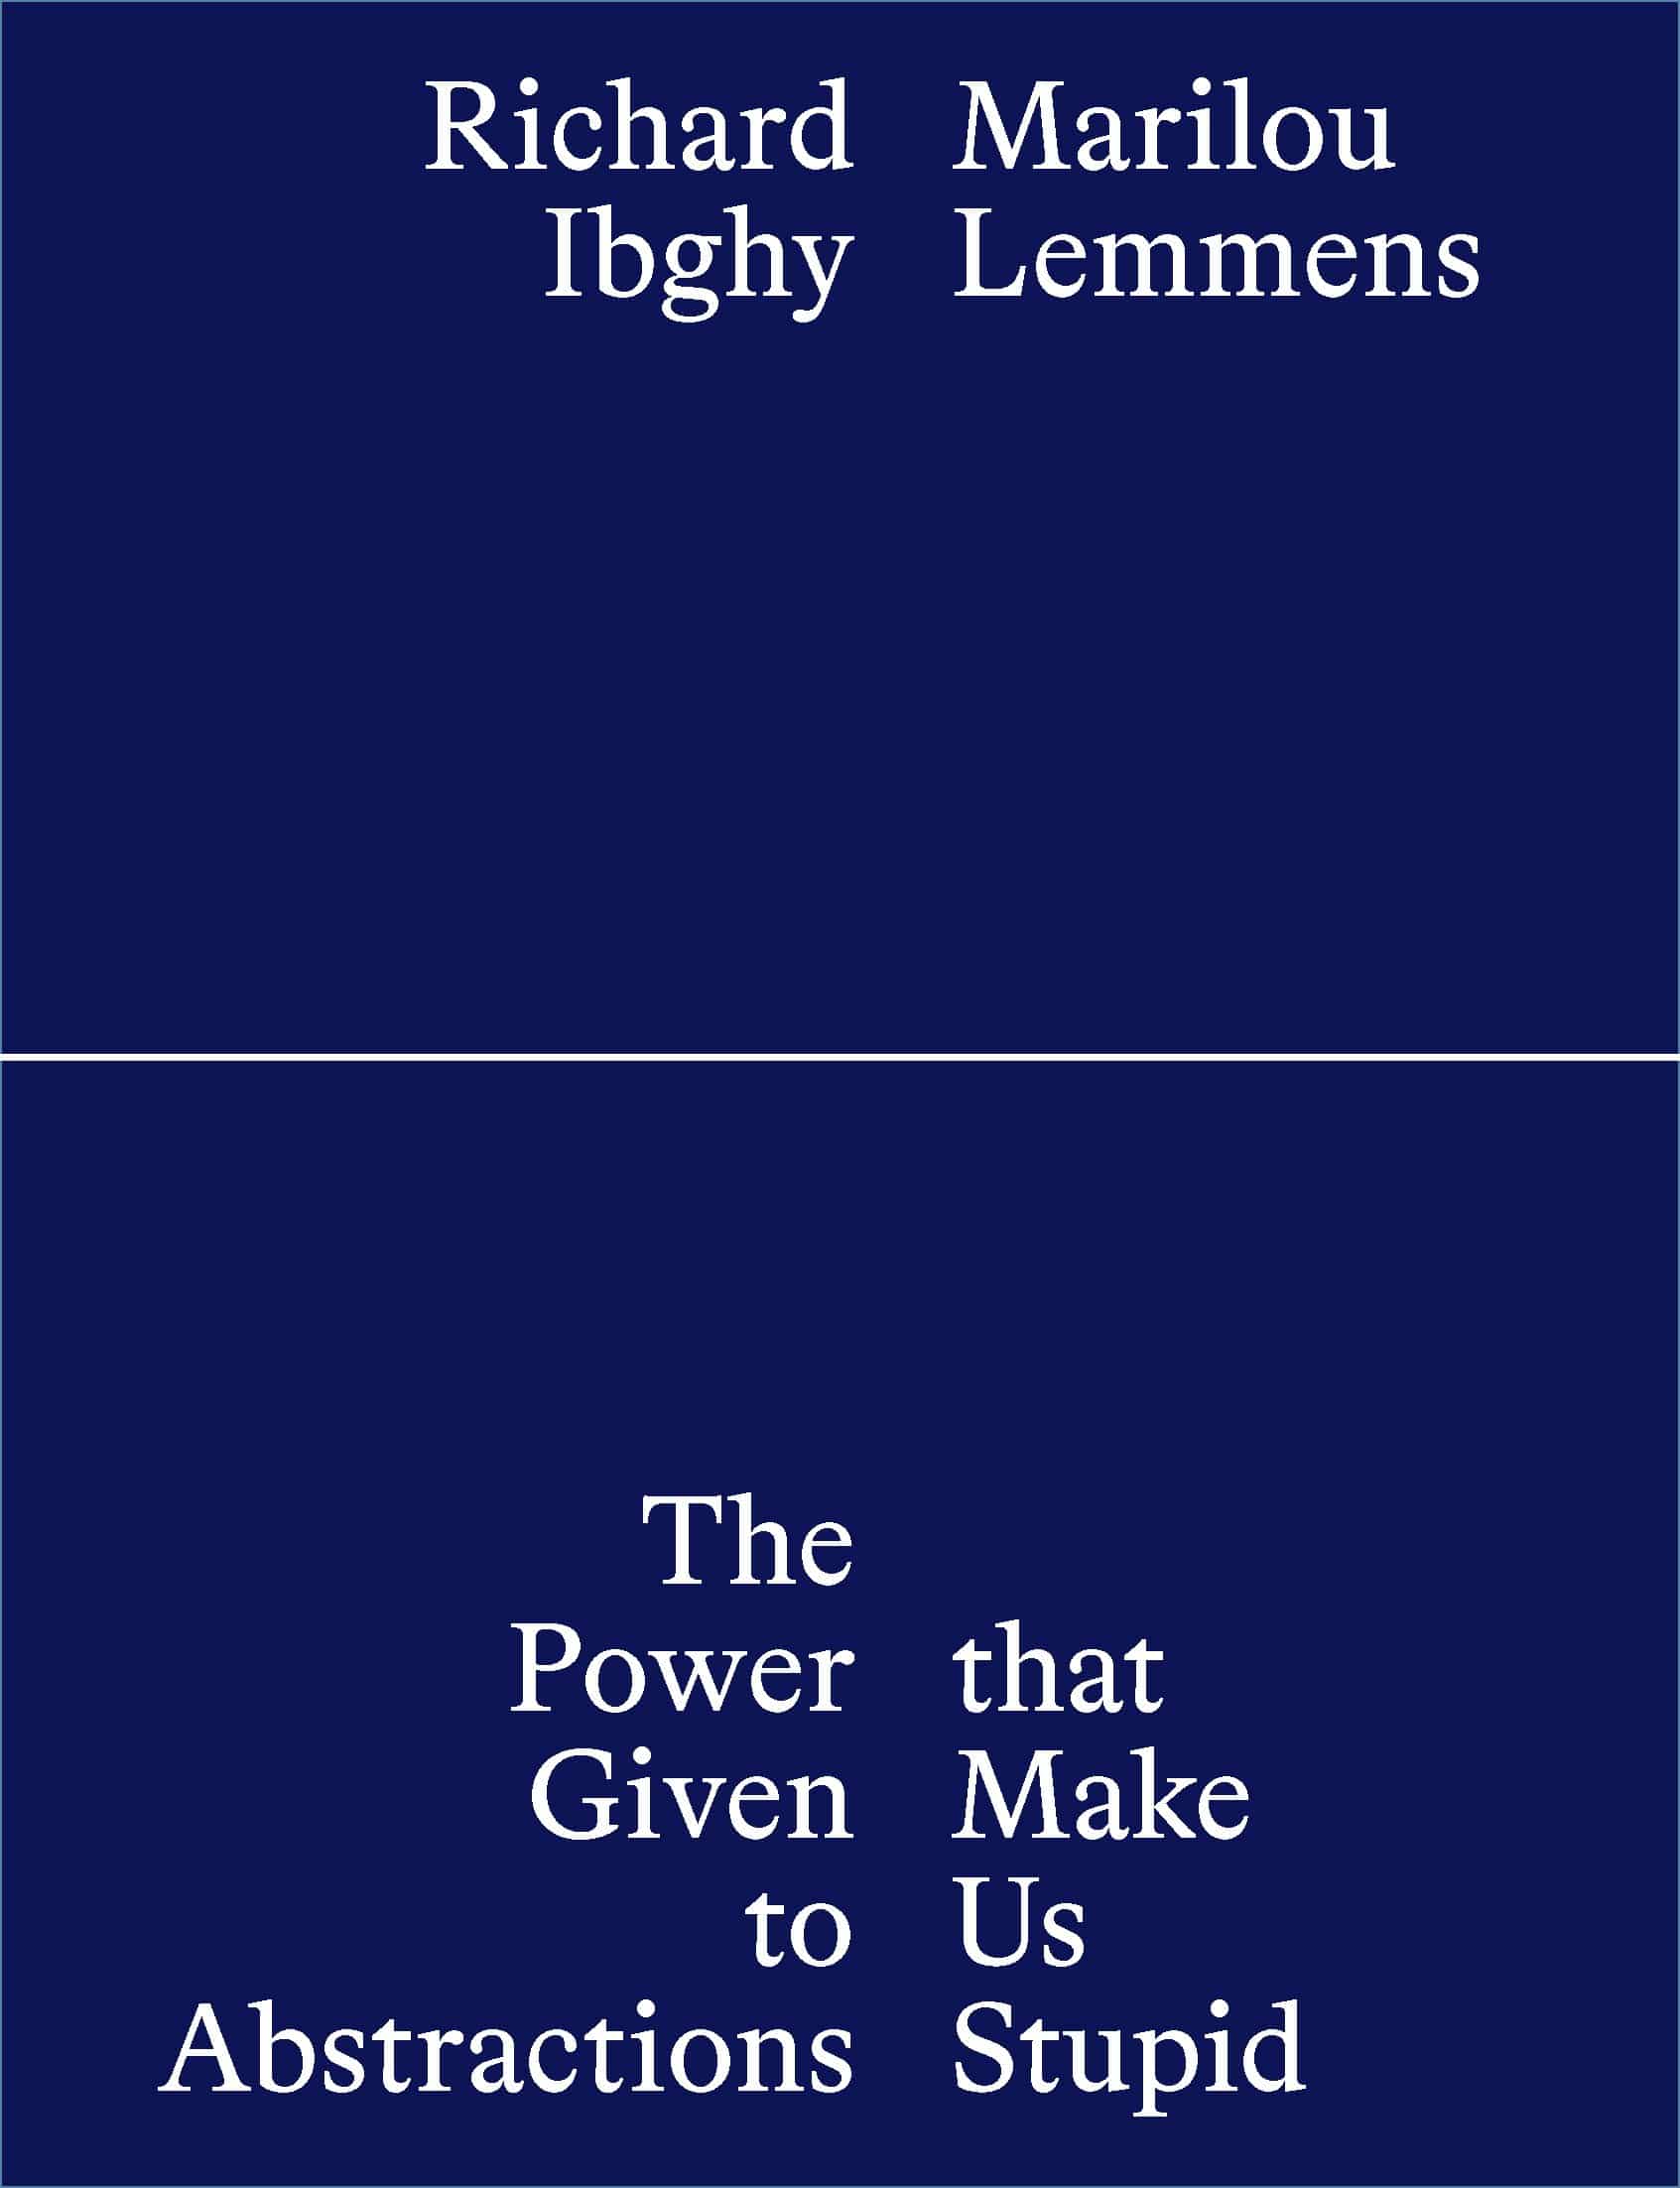 Richard Ibghy and Marilou Lemmens: The Power Given to Abstractions that Make Us Stupid